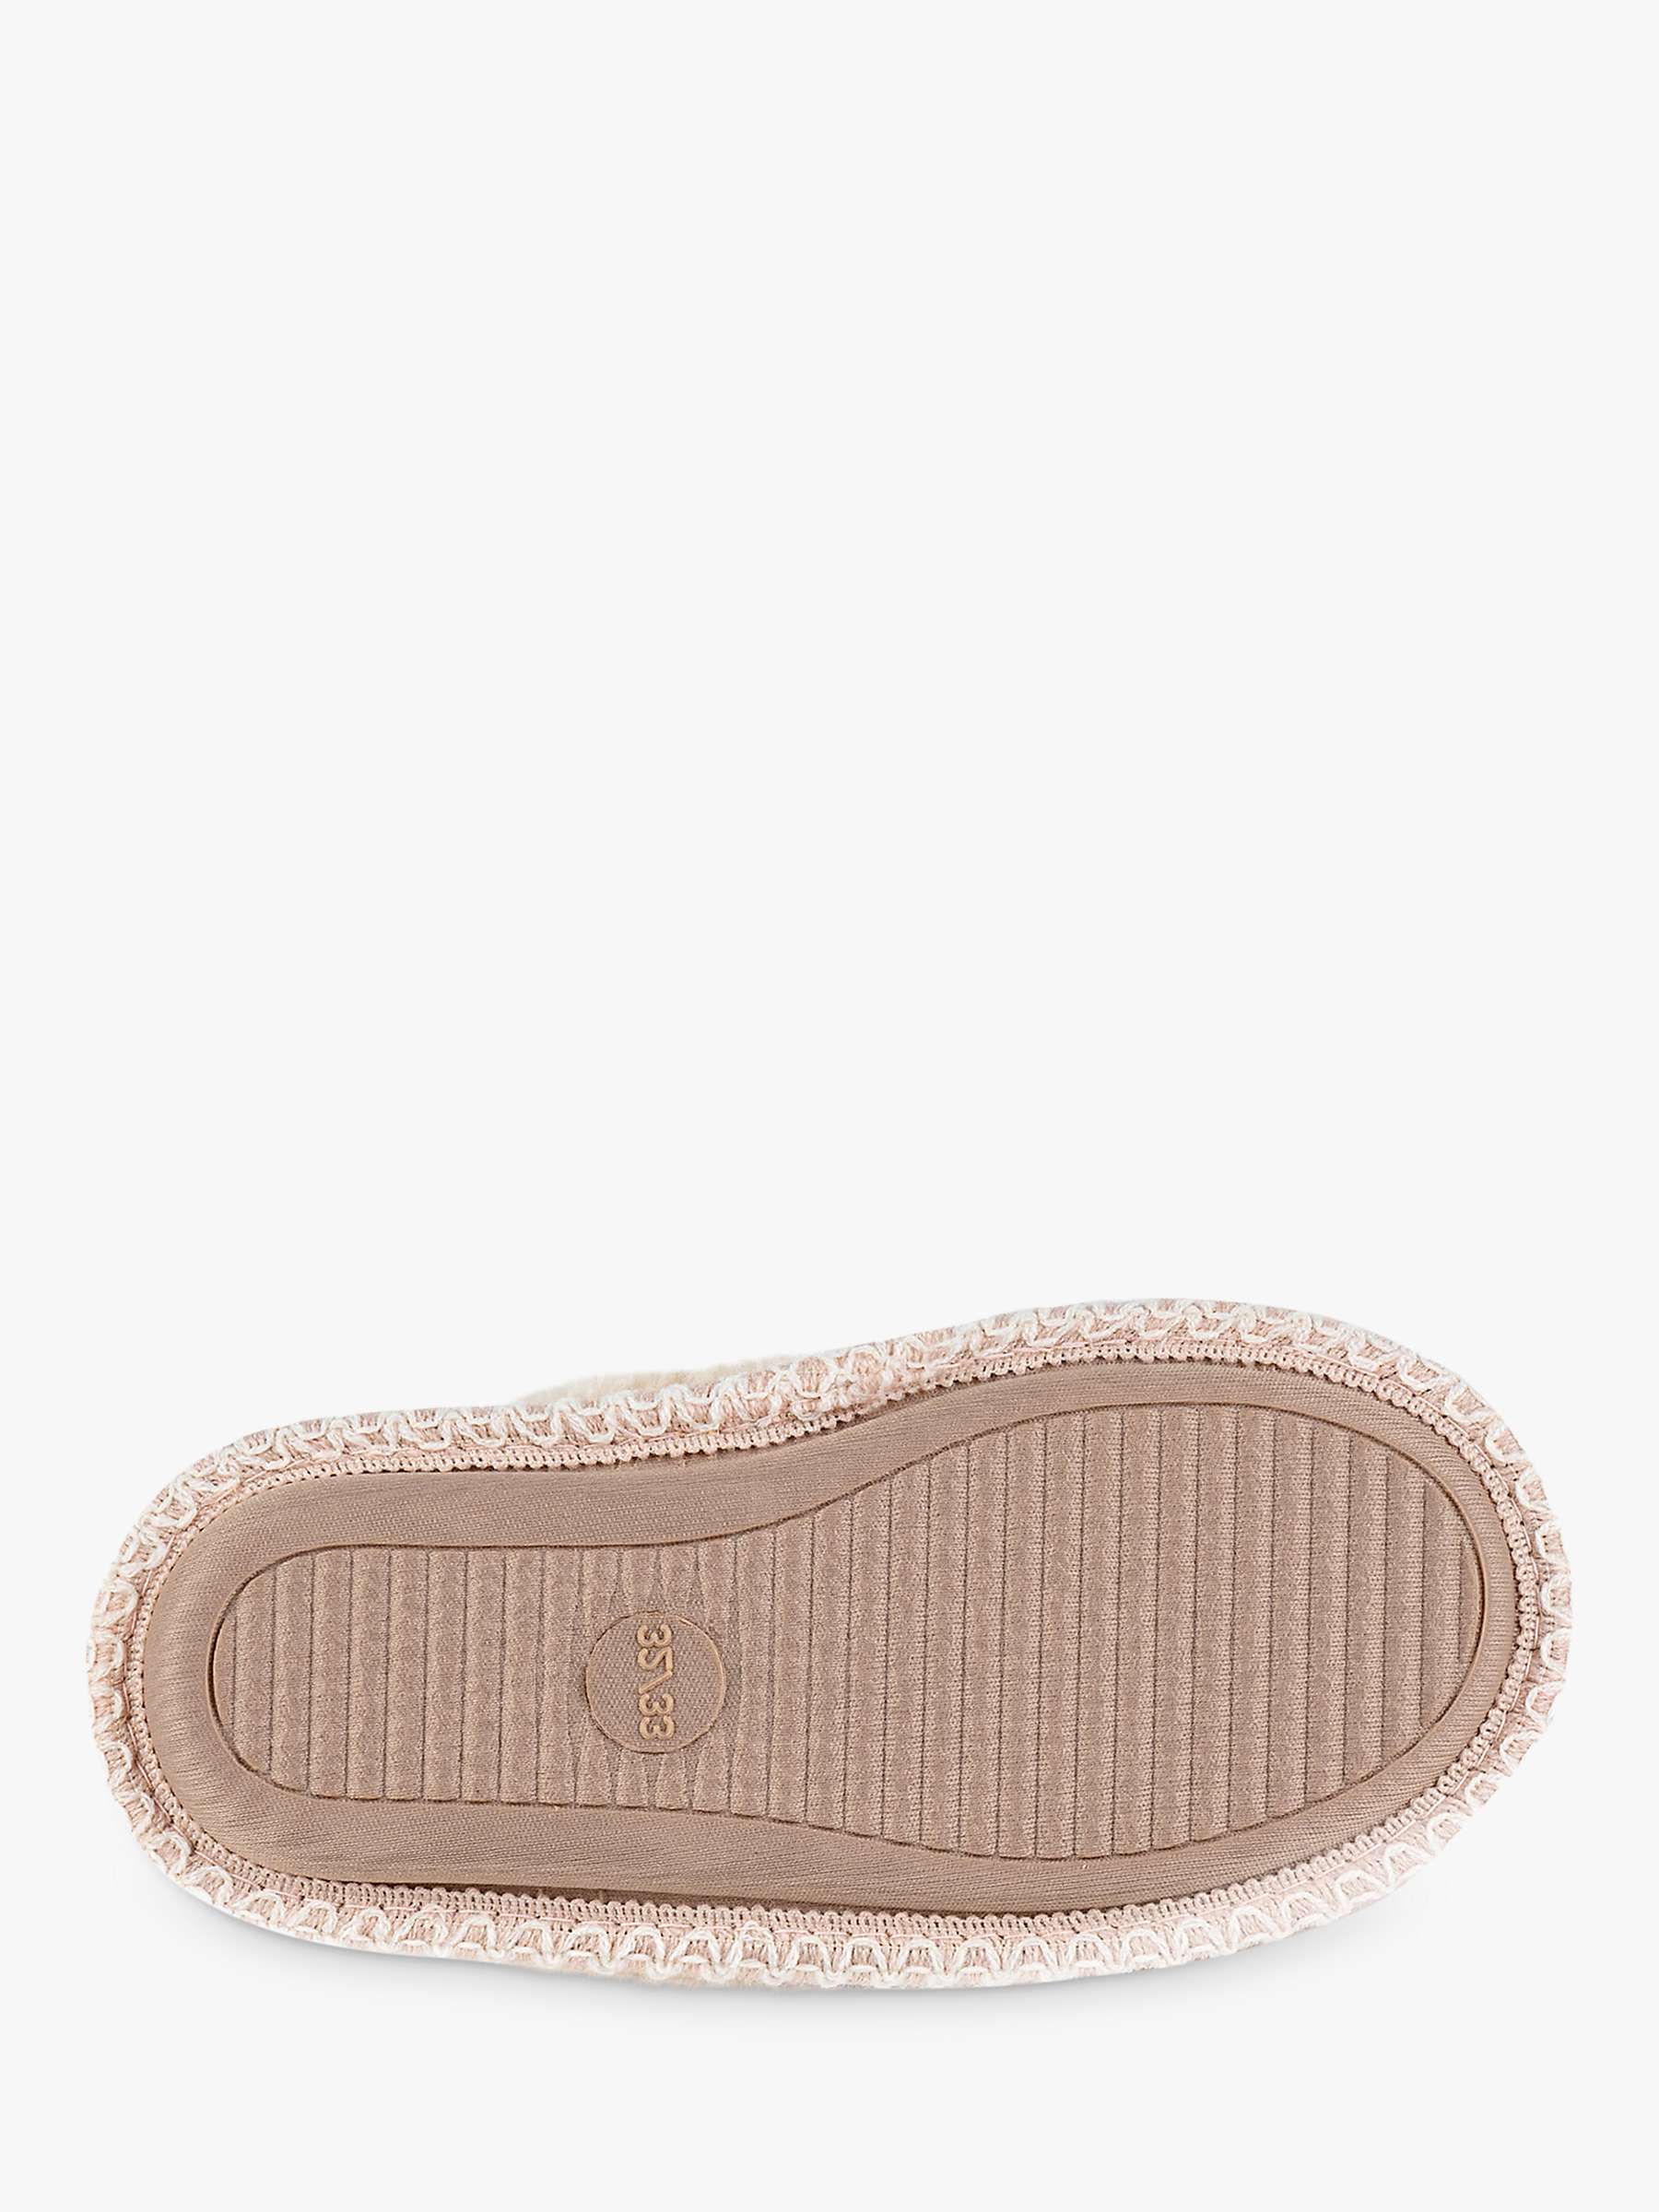 Buy totes Kids' Sparkle Suede Mule Slippers Online at johnlewis.com